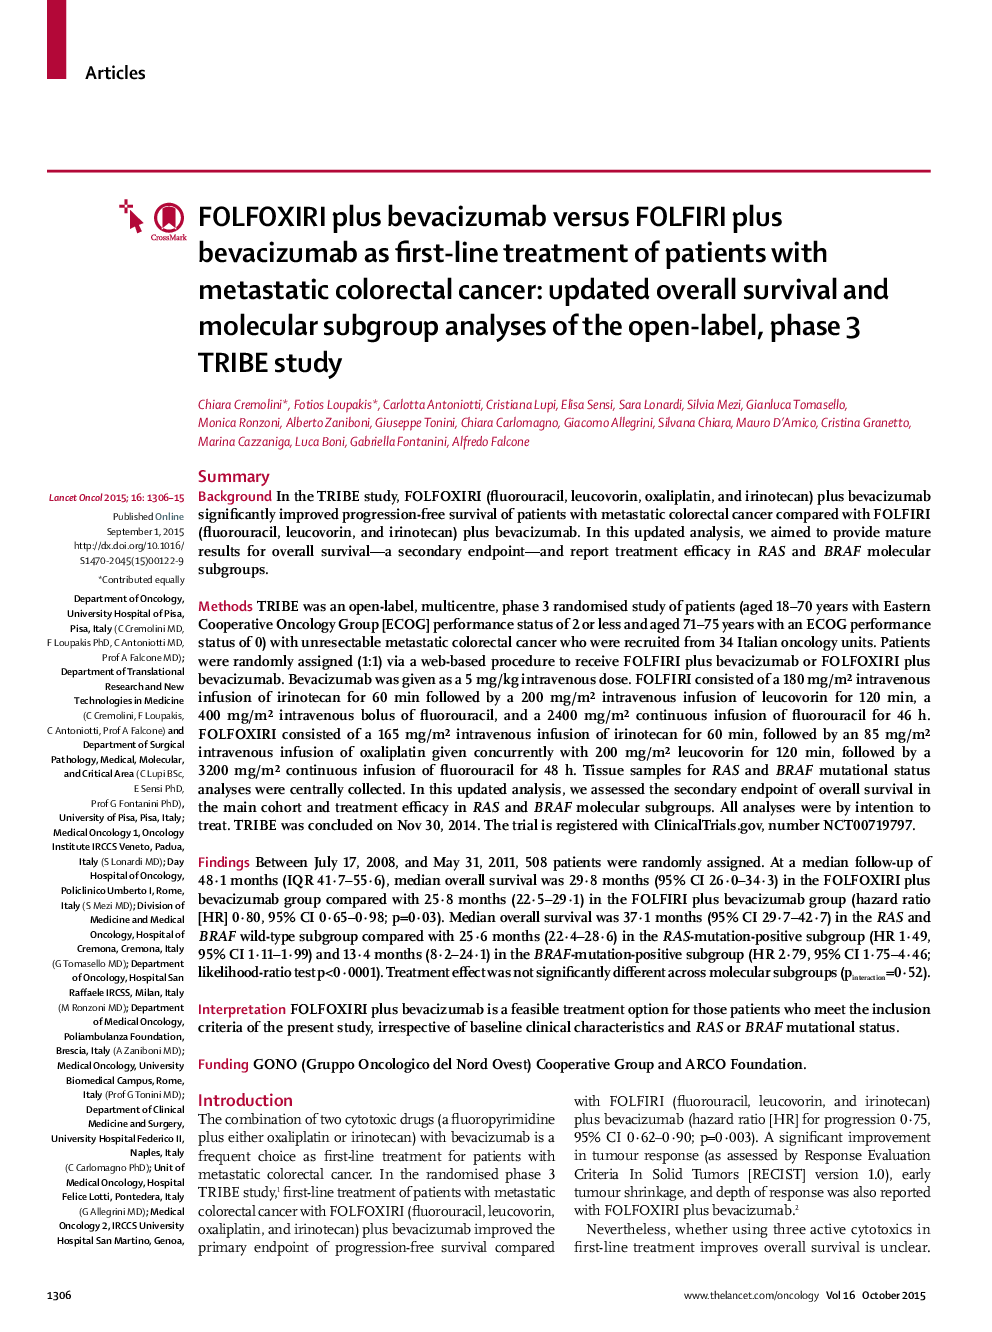 FOLFOXIRI plus bevacizumab versus FOLFIRI plus bevacizumab as first-line treatment of patients with metastatic colorectal cancer: updated overall survival and molecular subgroup analyses of the open-label, phase 3 TRIBE study